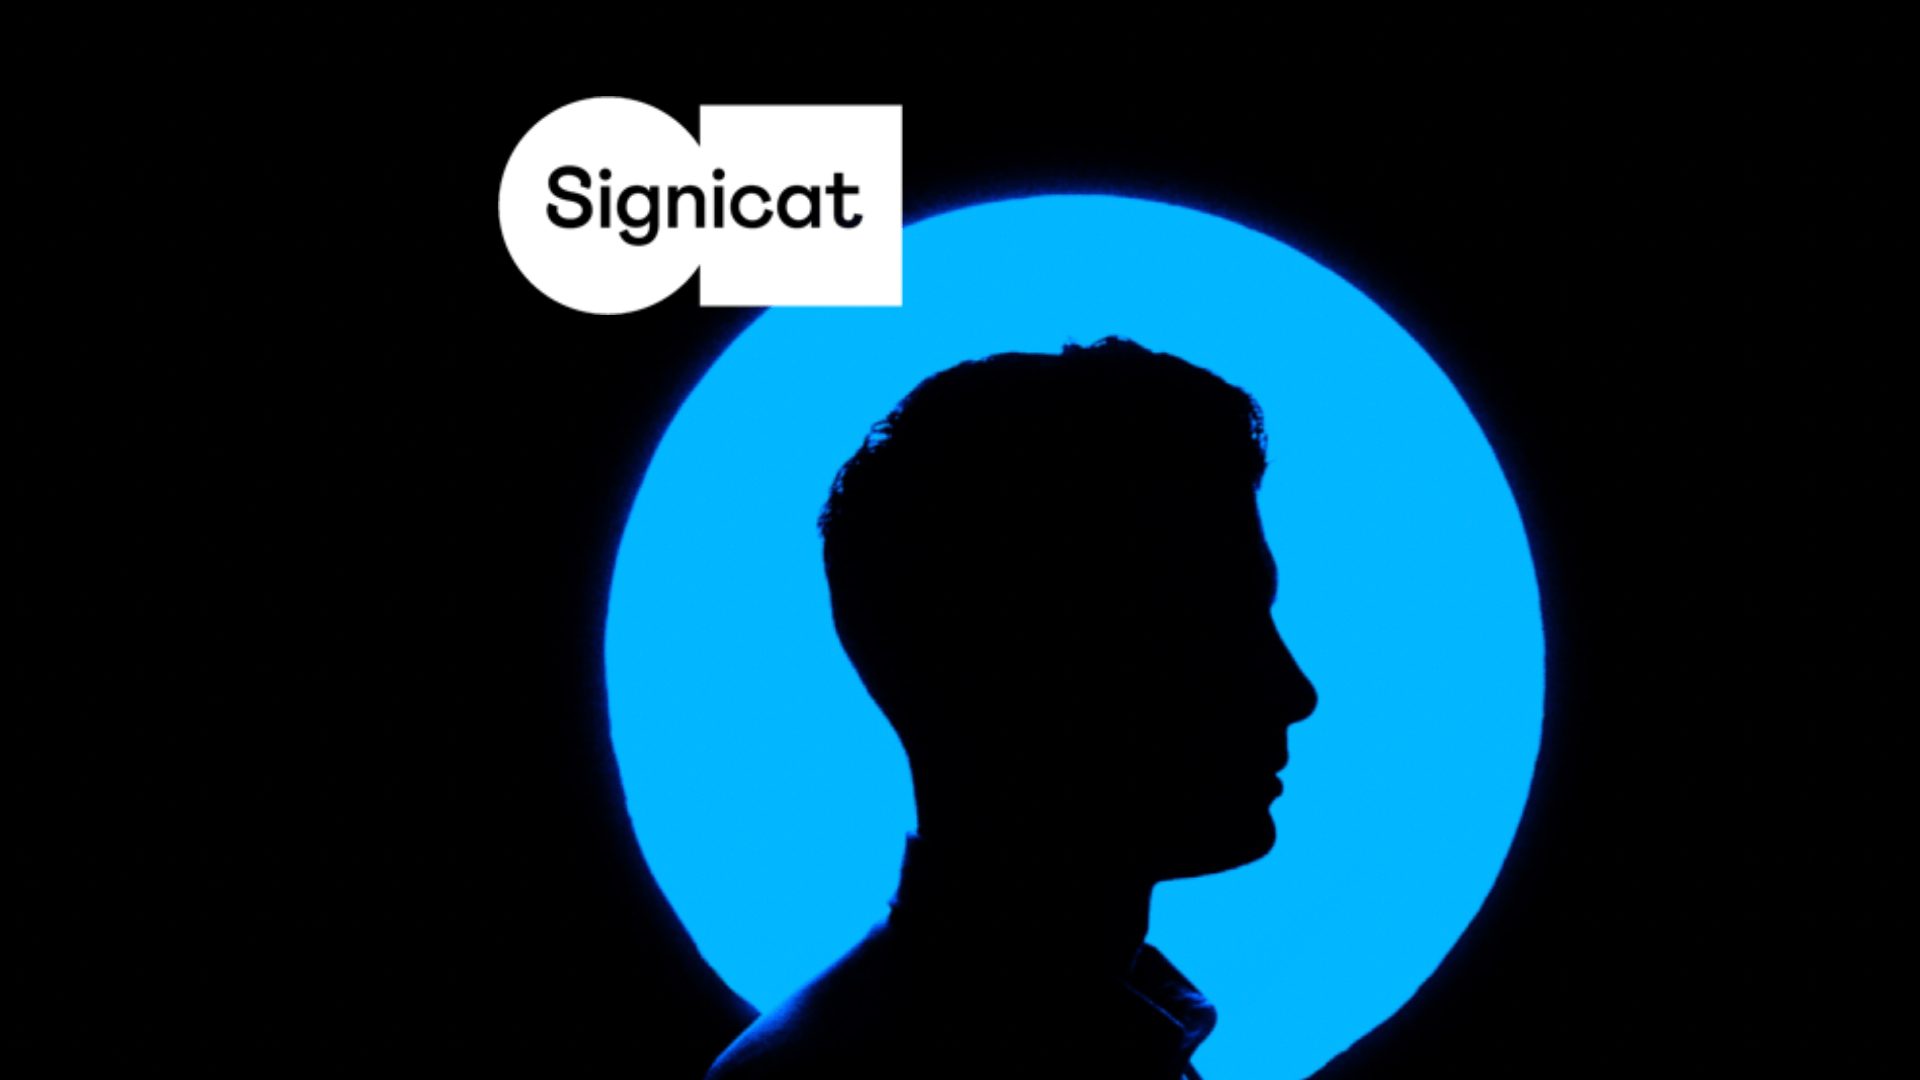 Almost 200 qualified leads for Signicat